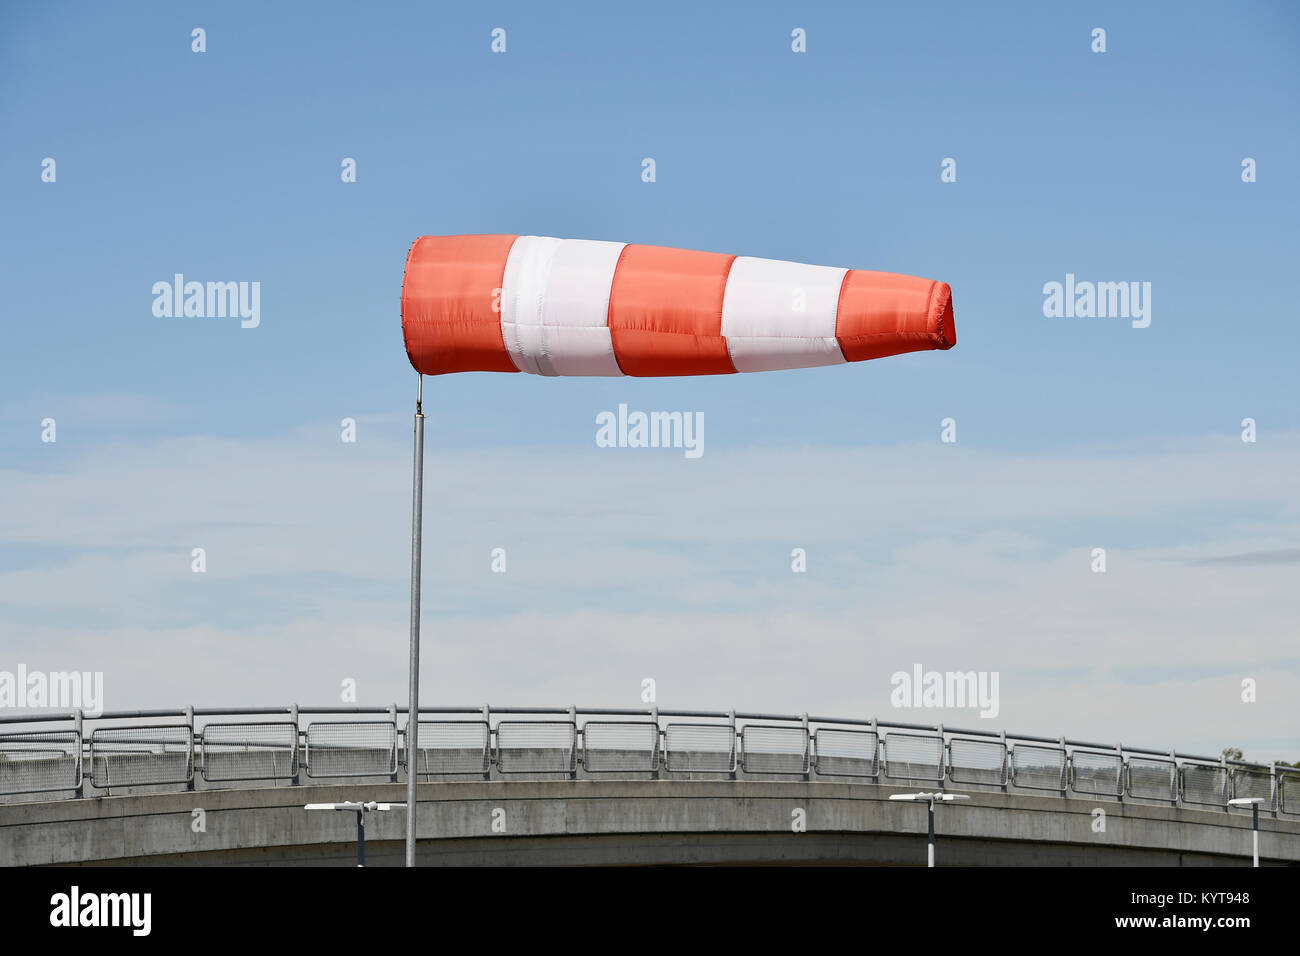 sock, windvane, wind, storm, flight weather, conditions, storm strength, wind direction, indicator, nature, Munich Airport, Stock Photo